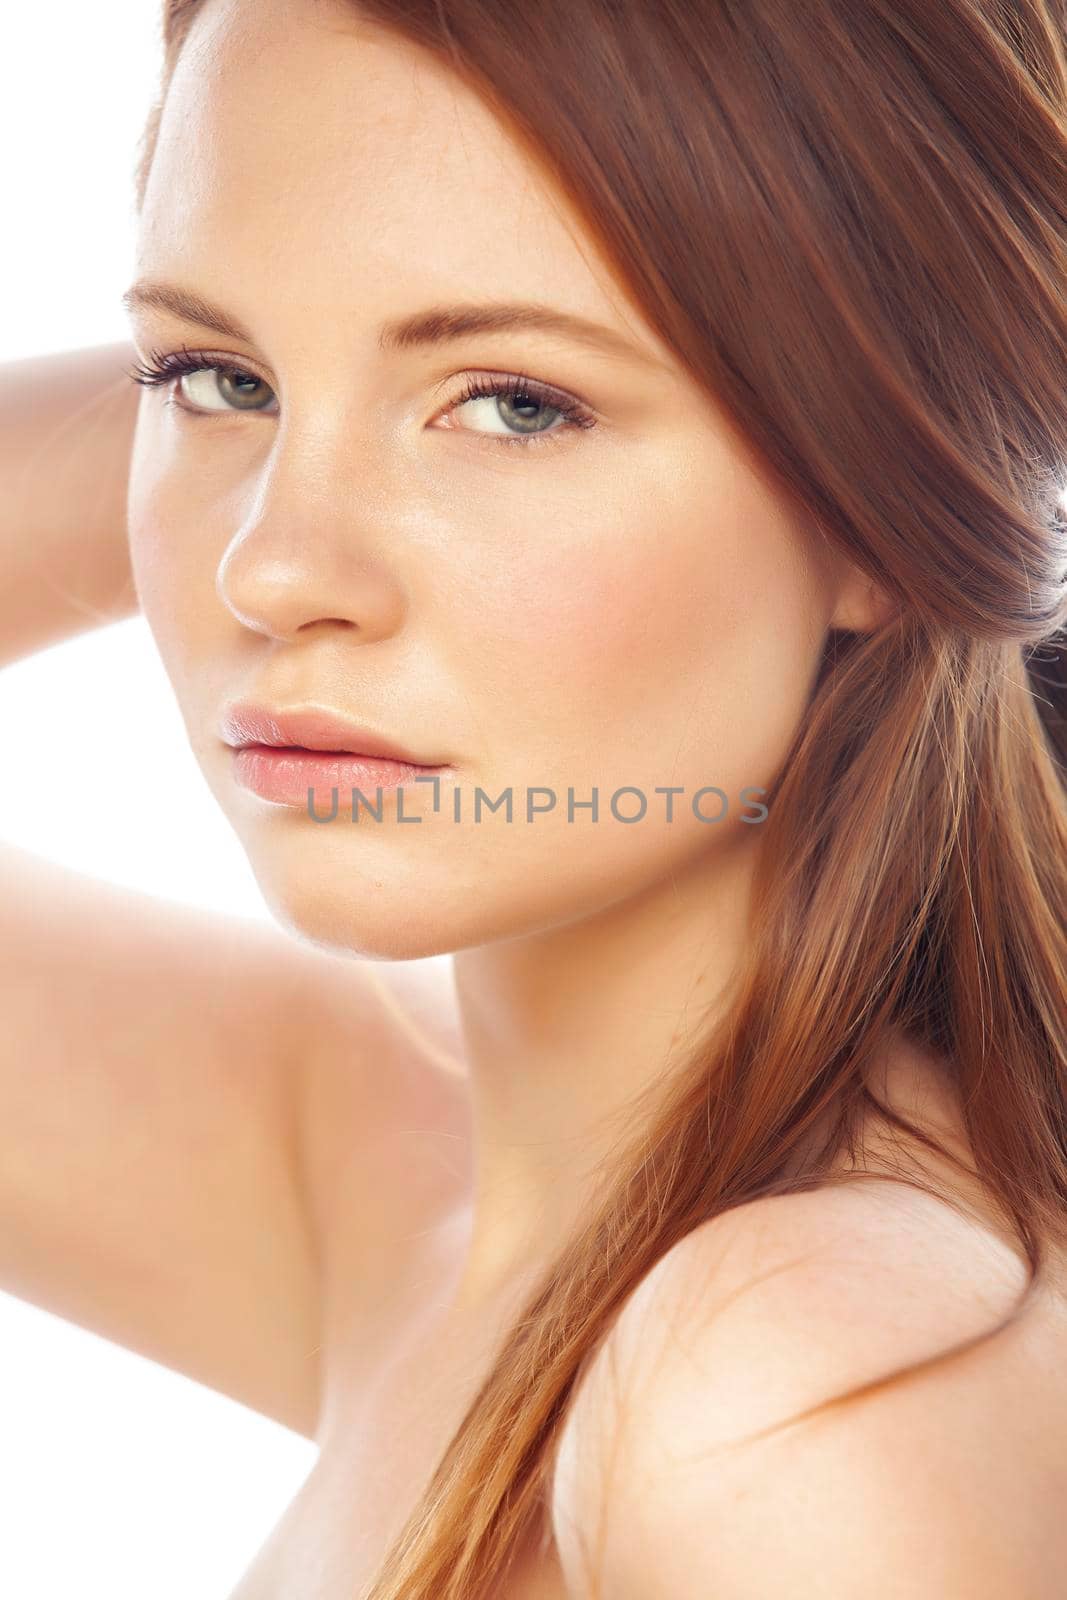 spa picture attractive lady young red hair isolated on white background by JordanJ